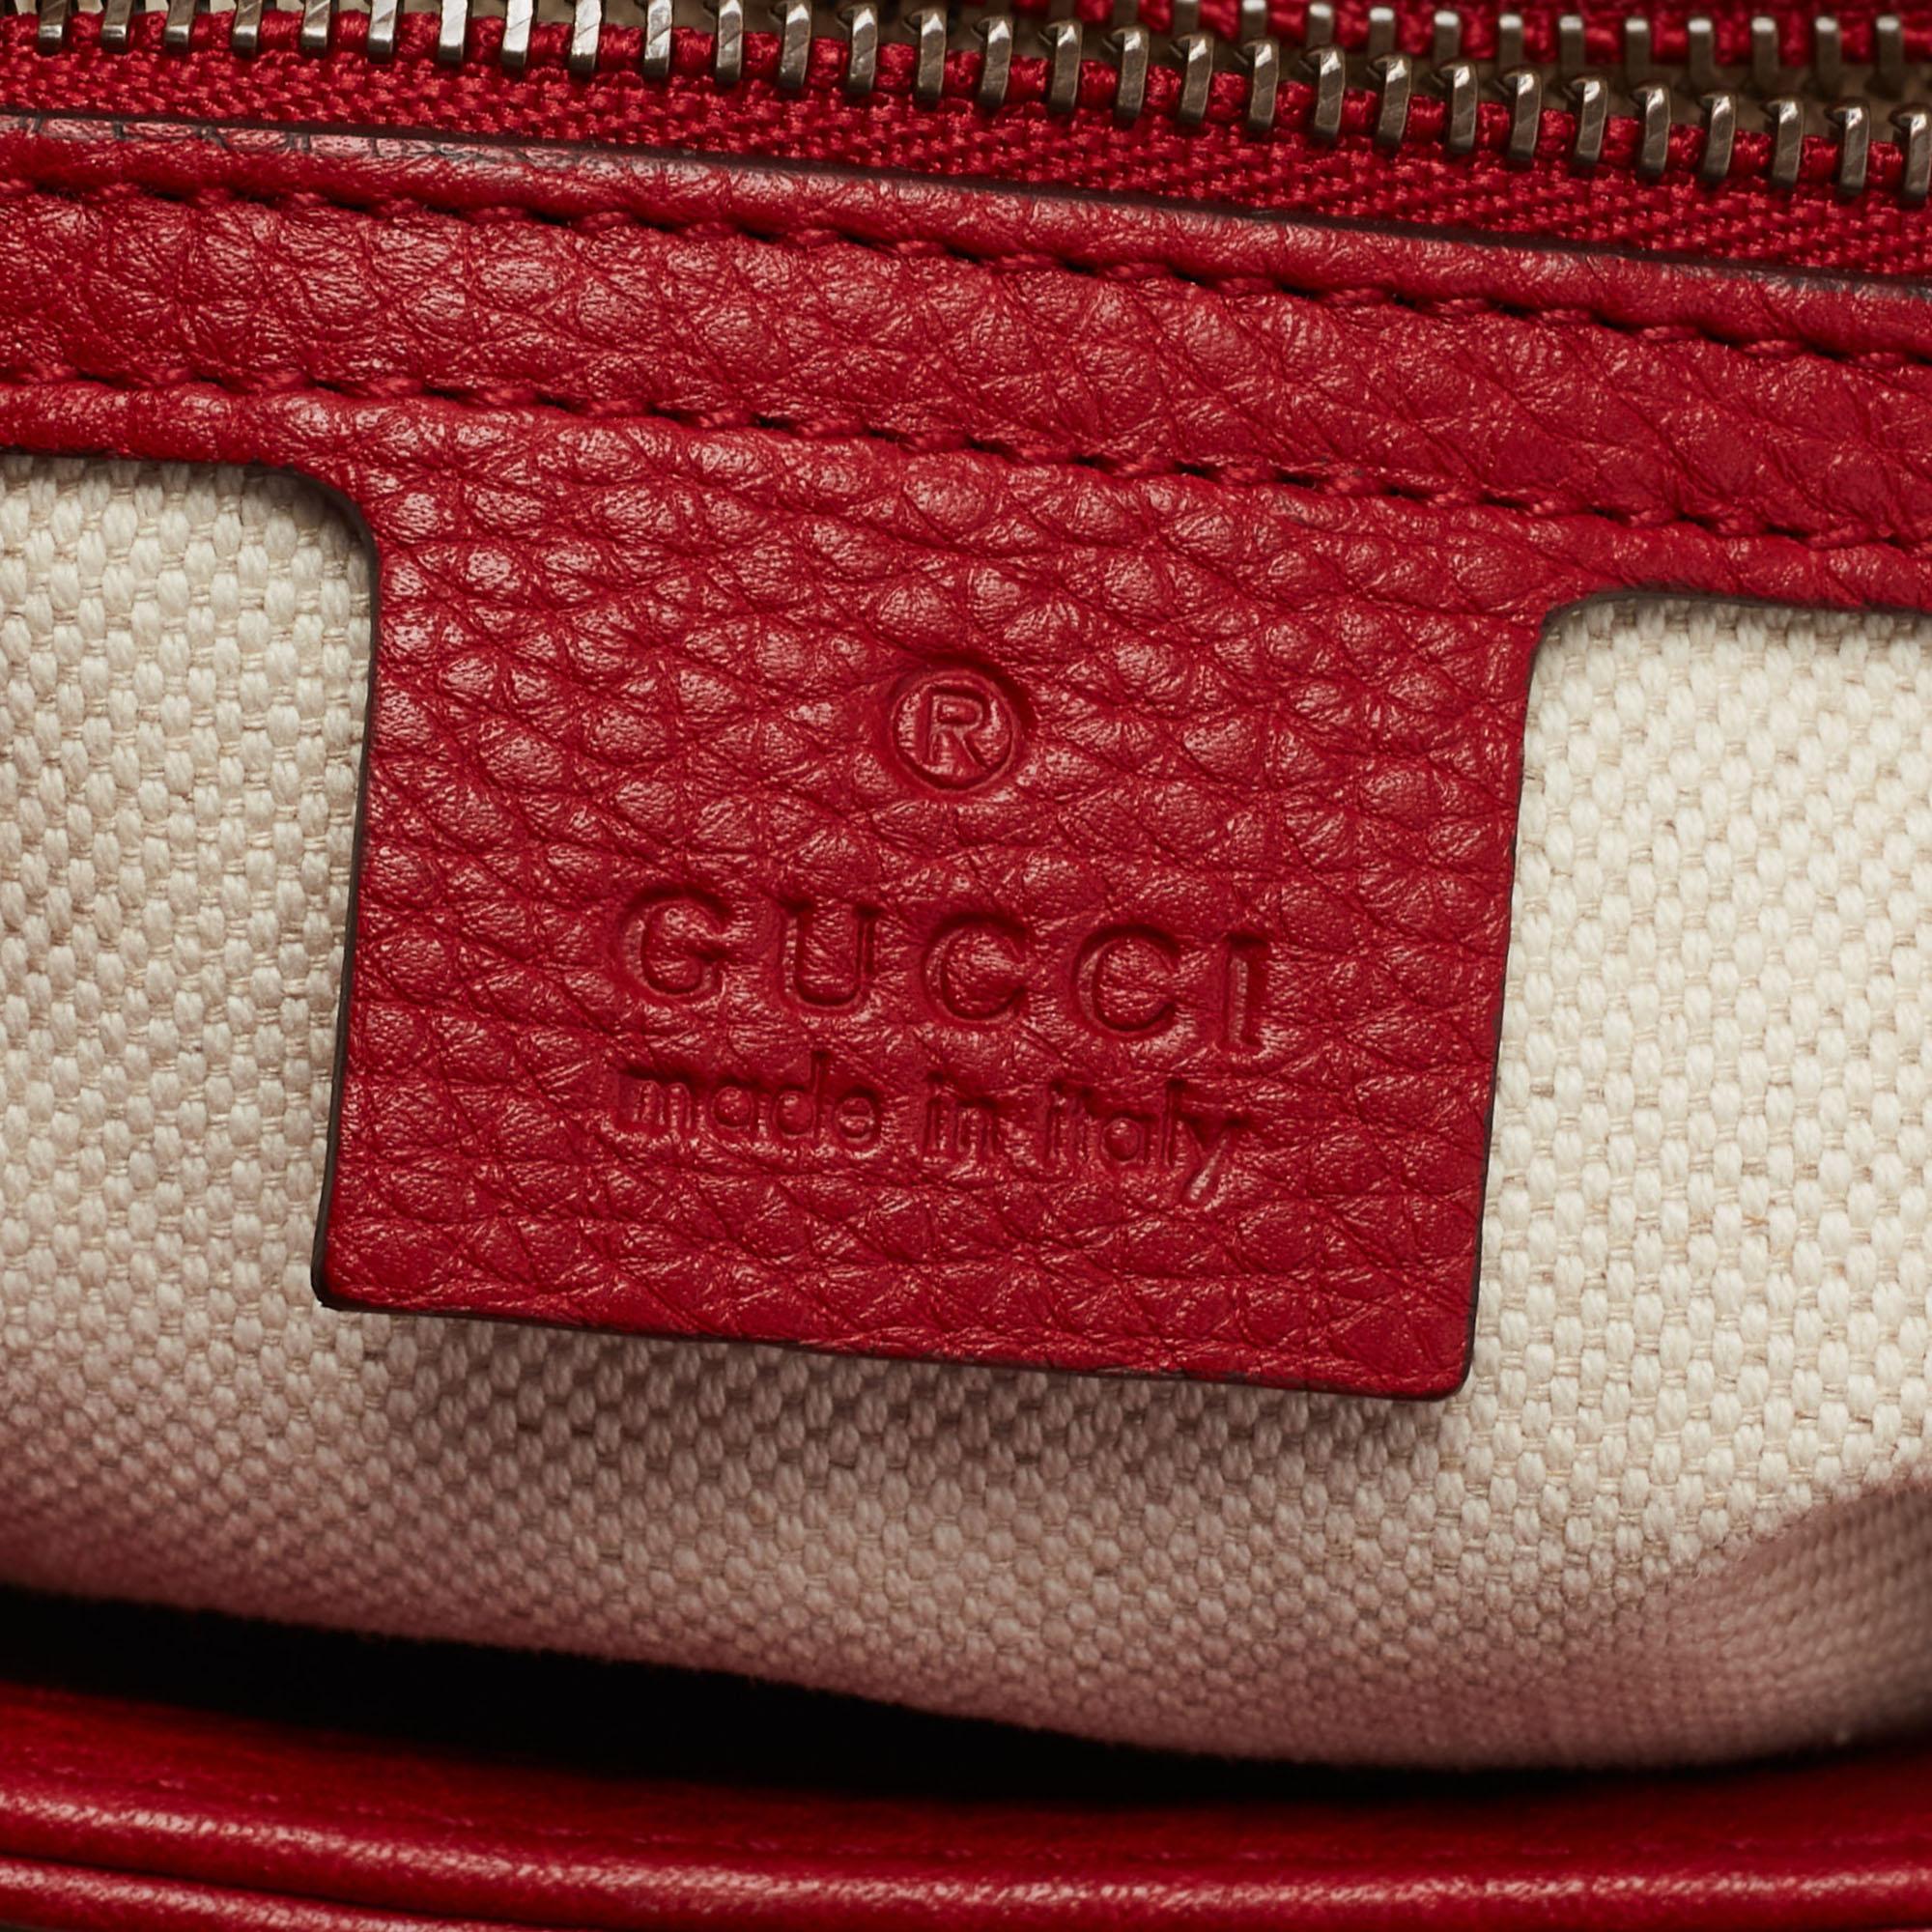 Gucci Red Leather GG Marmont Shoulder Bag 6